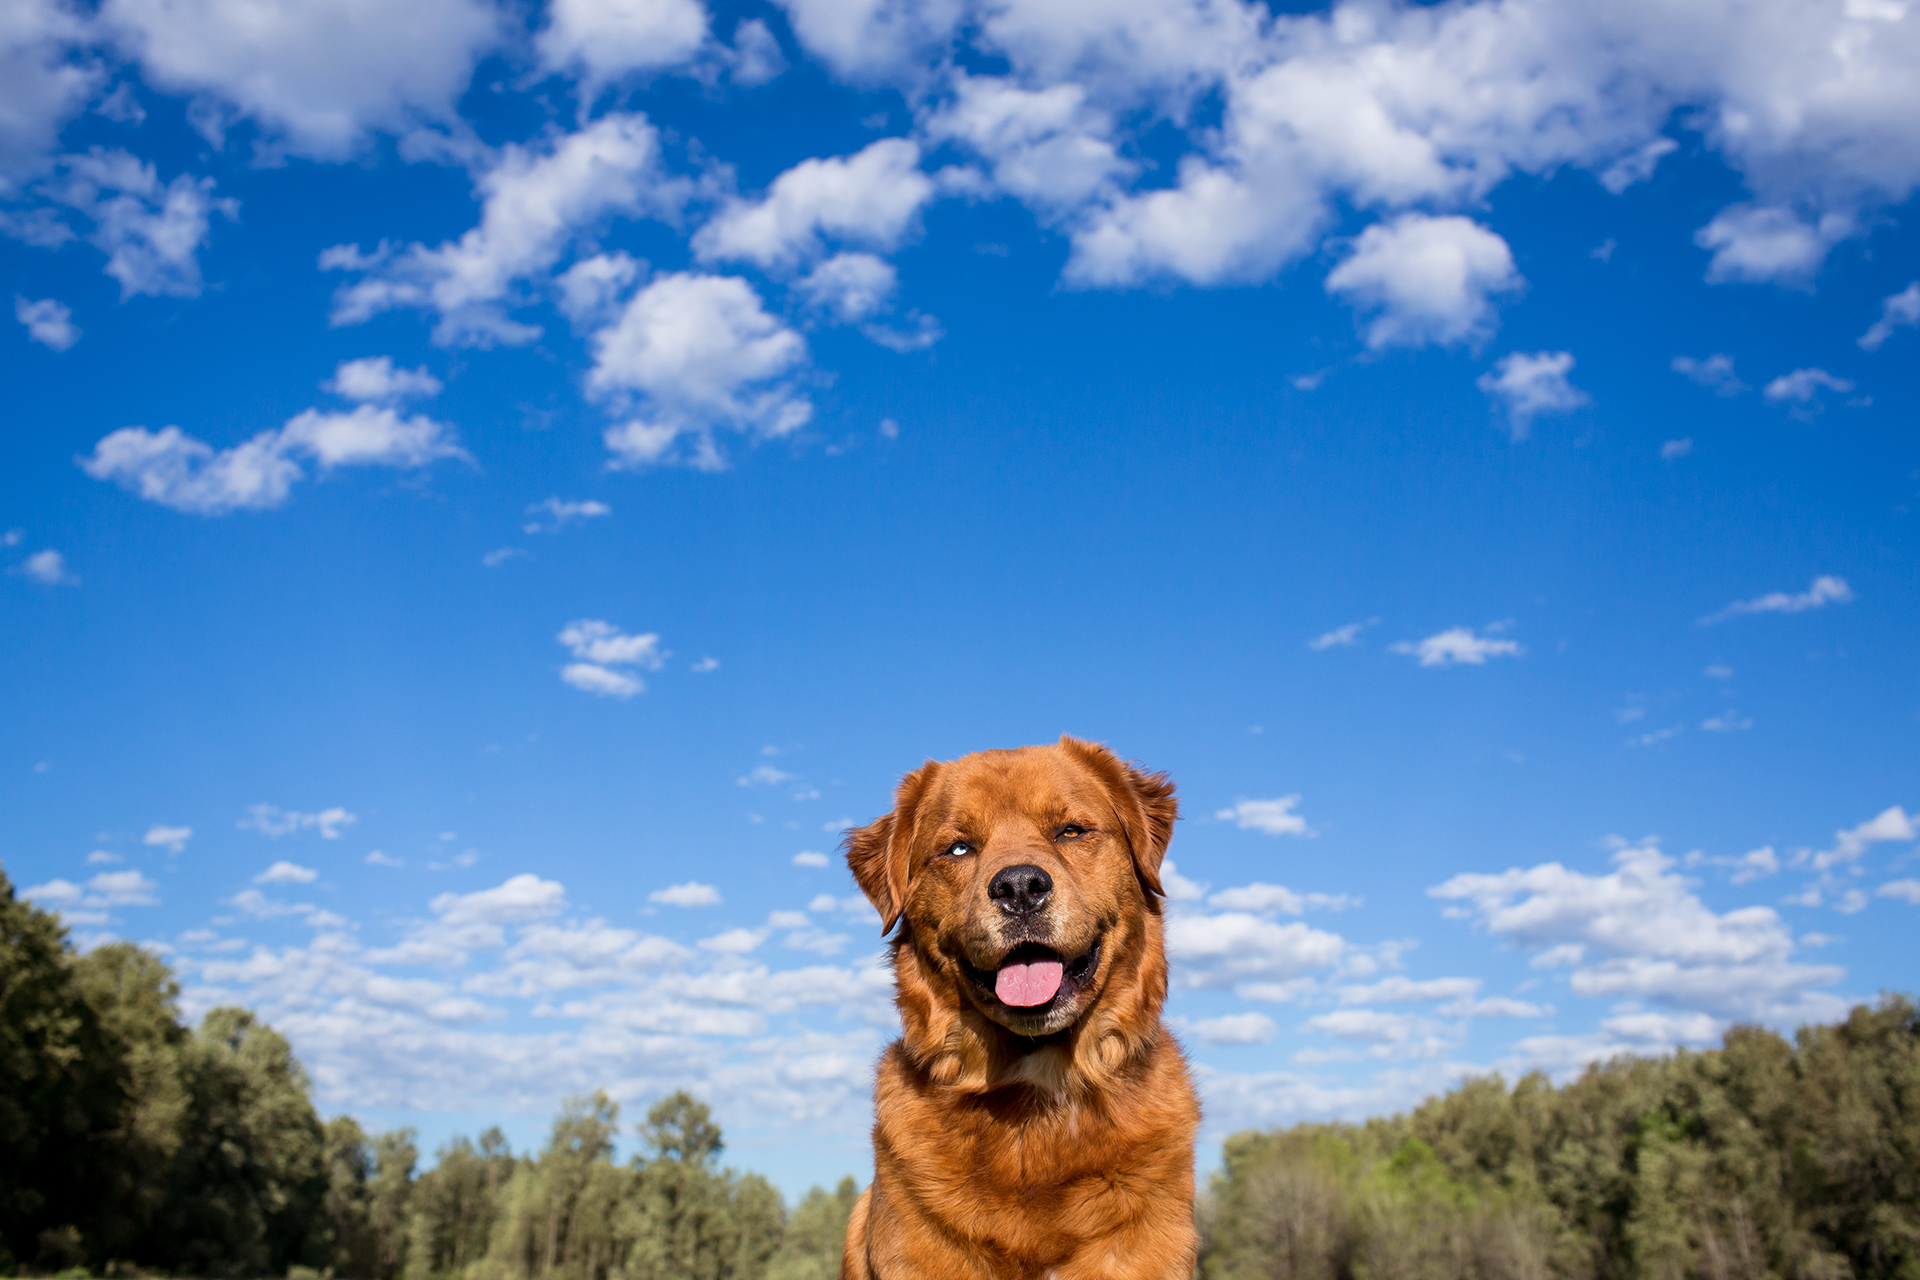 Dog with one blue eye and one brown eye posing with a big blue sky and clouds